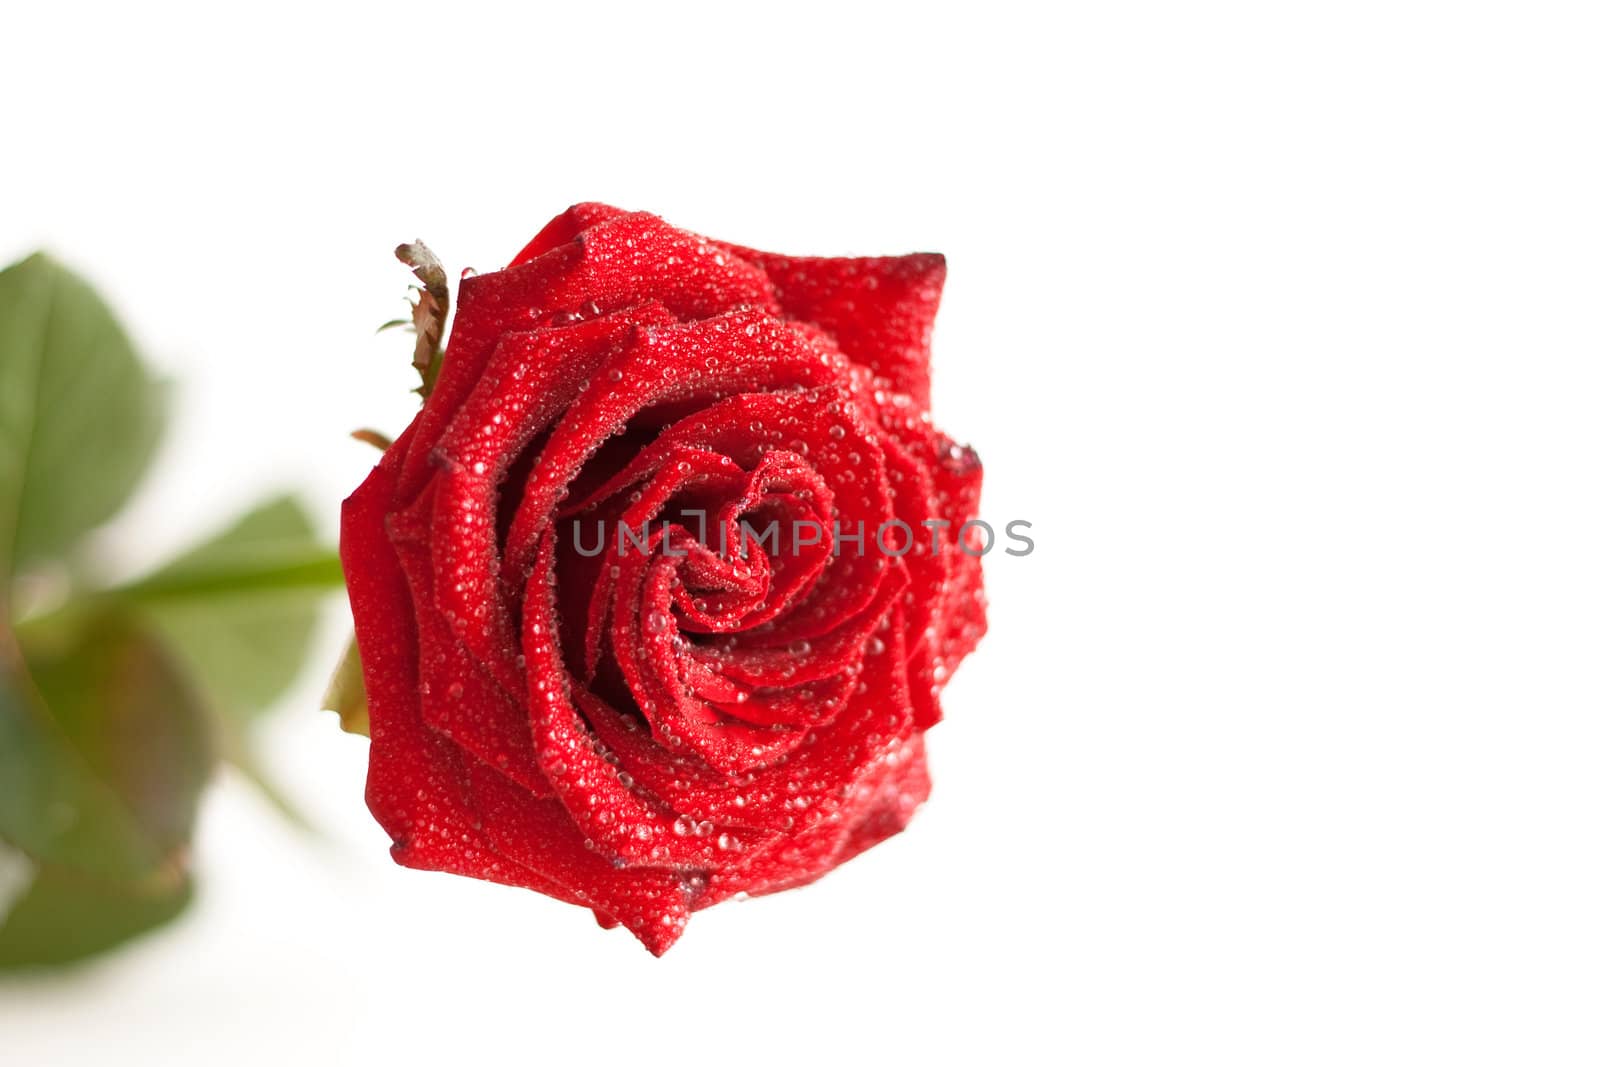 A red rose with water drops by azschach